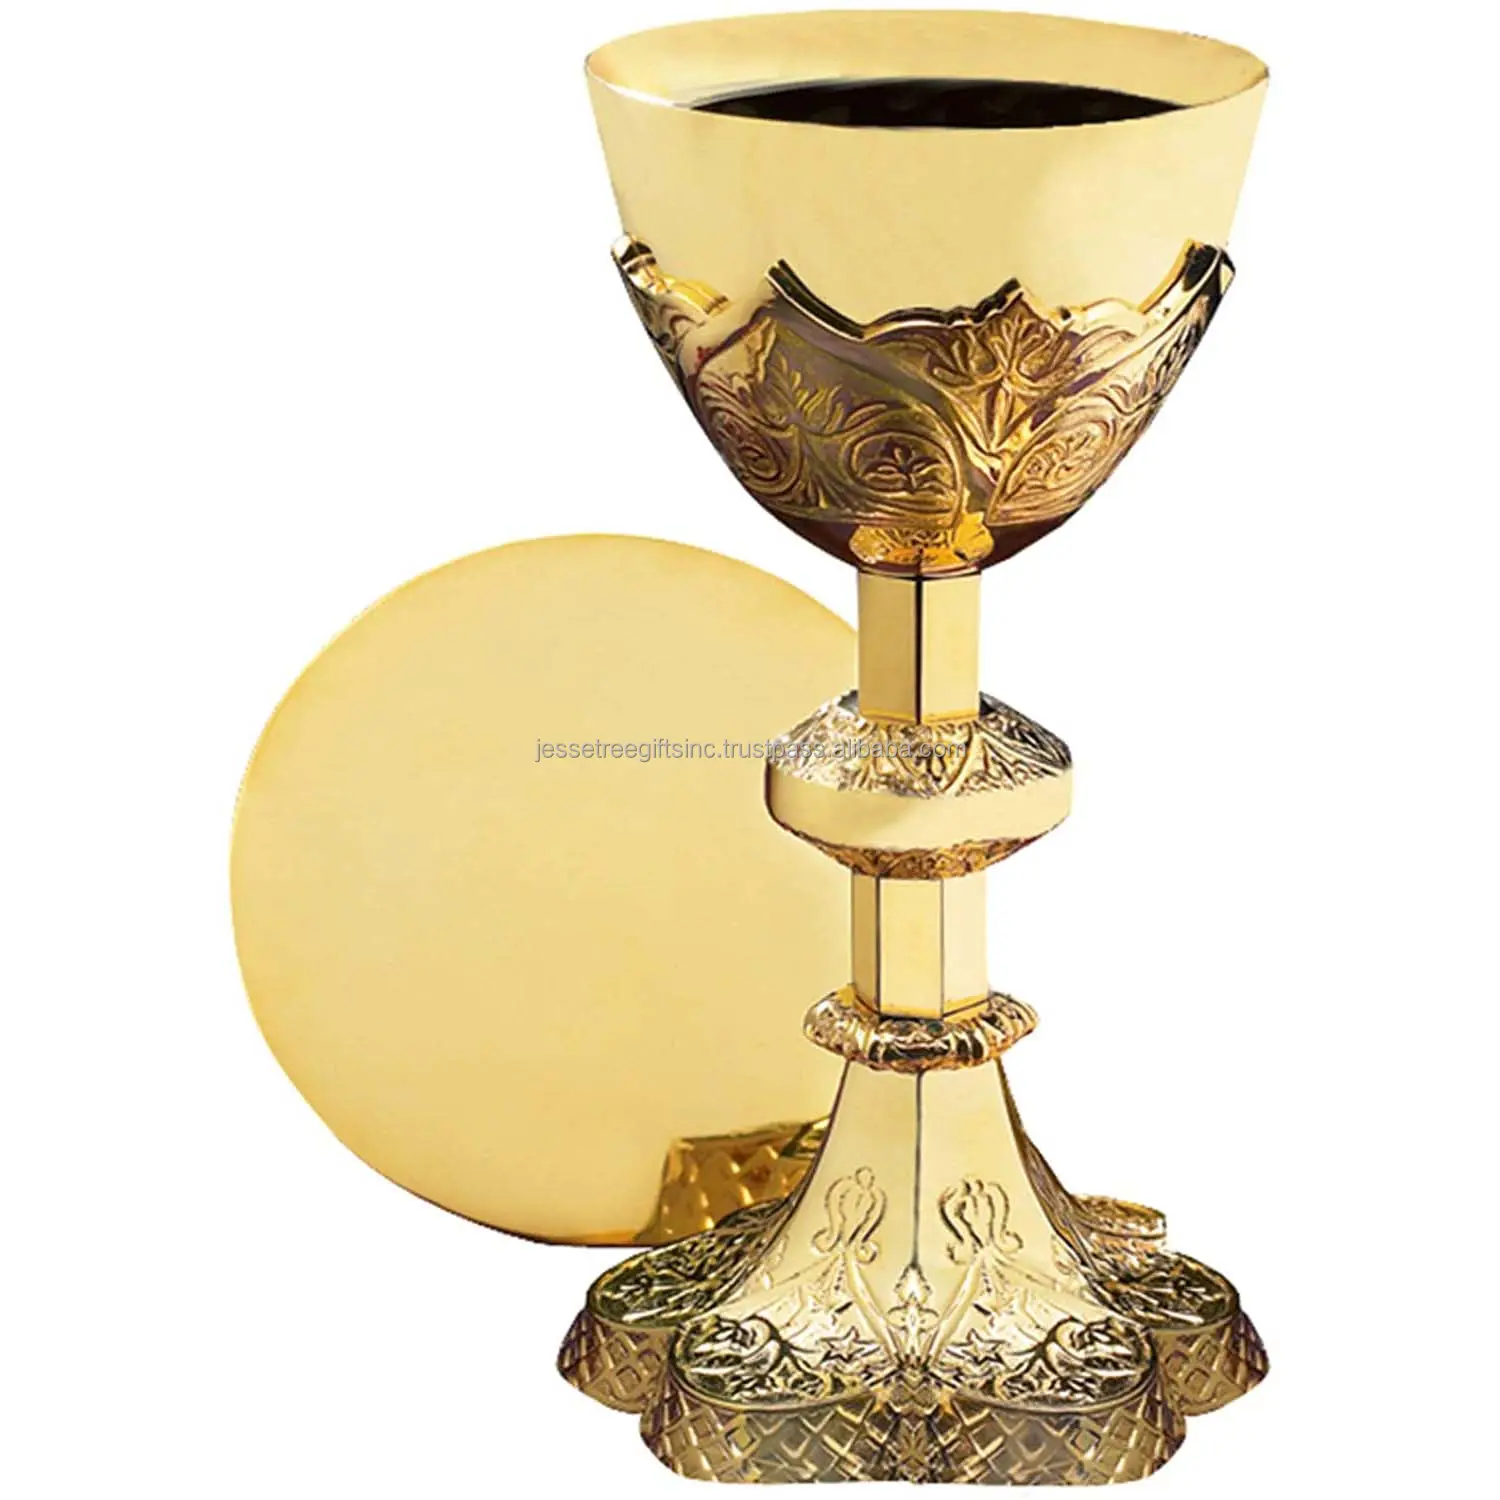 Classic Style Metal Church Chalice With Shiny Golden Plated Finishing Floral Embossed Design With Round Paten For Drinking